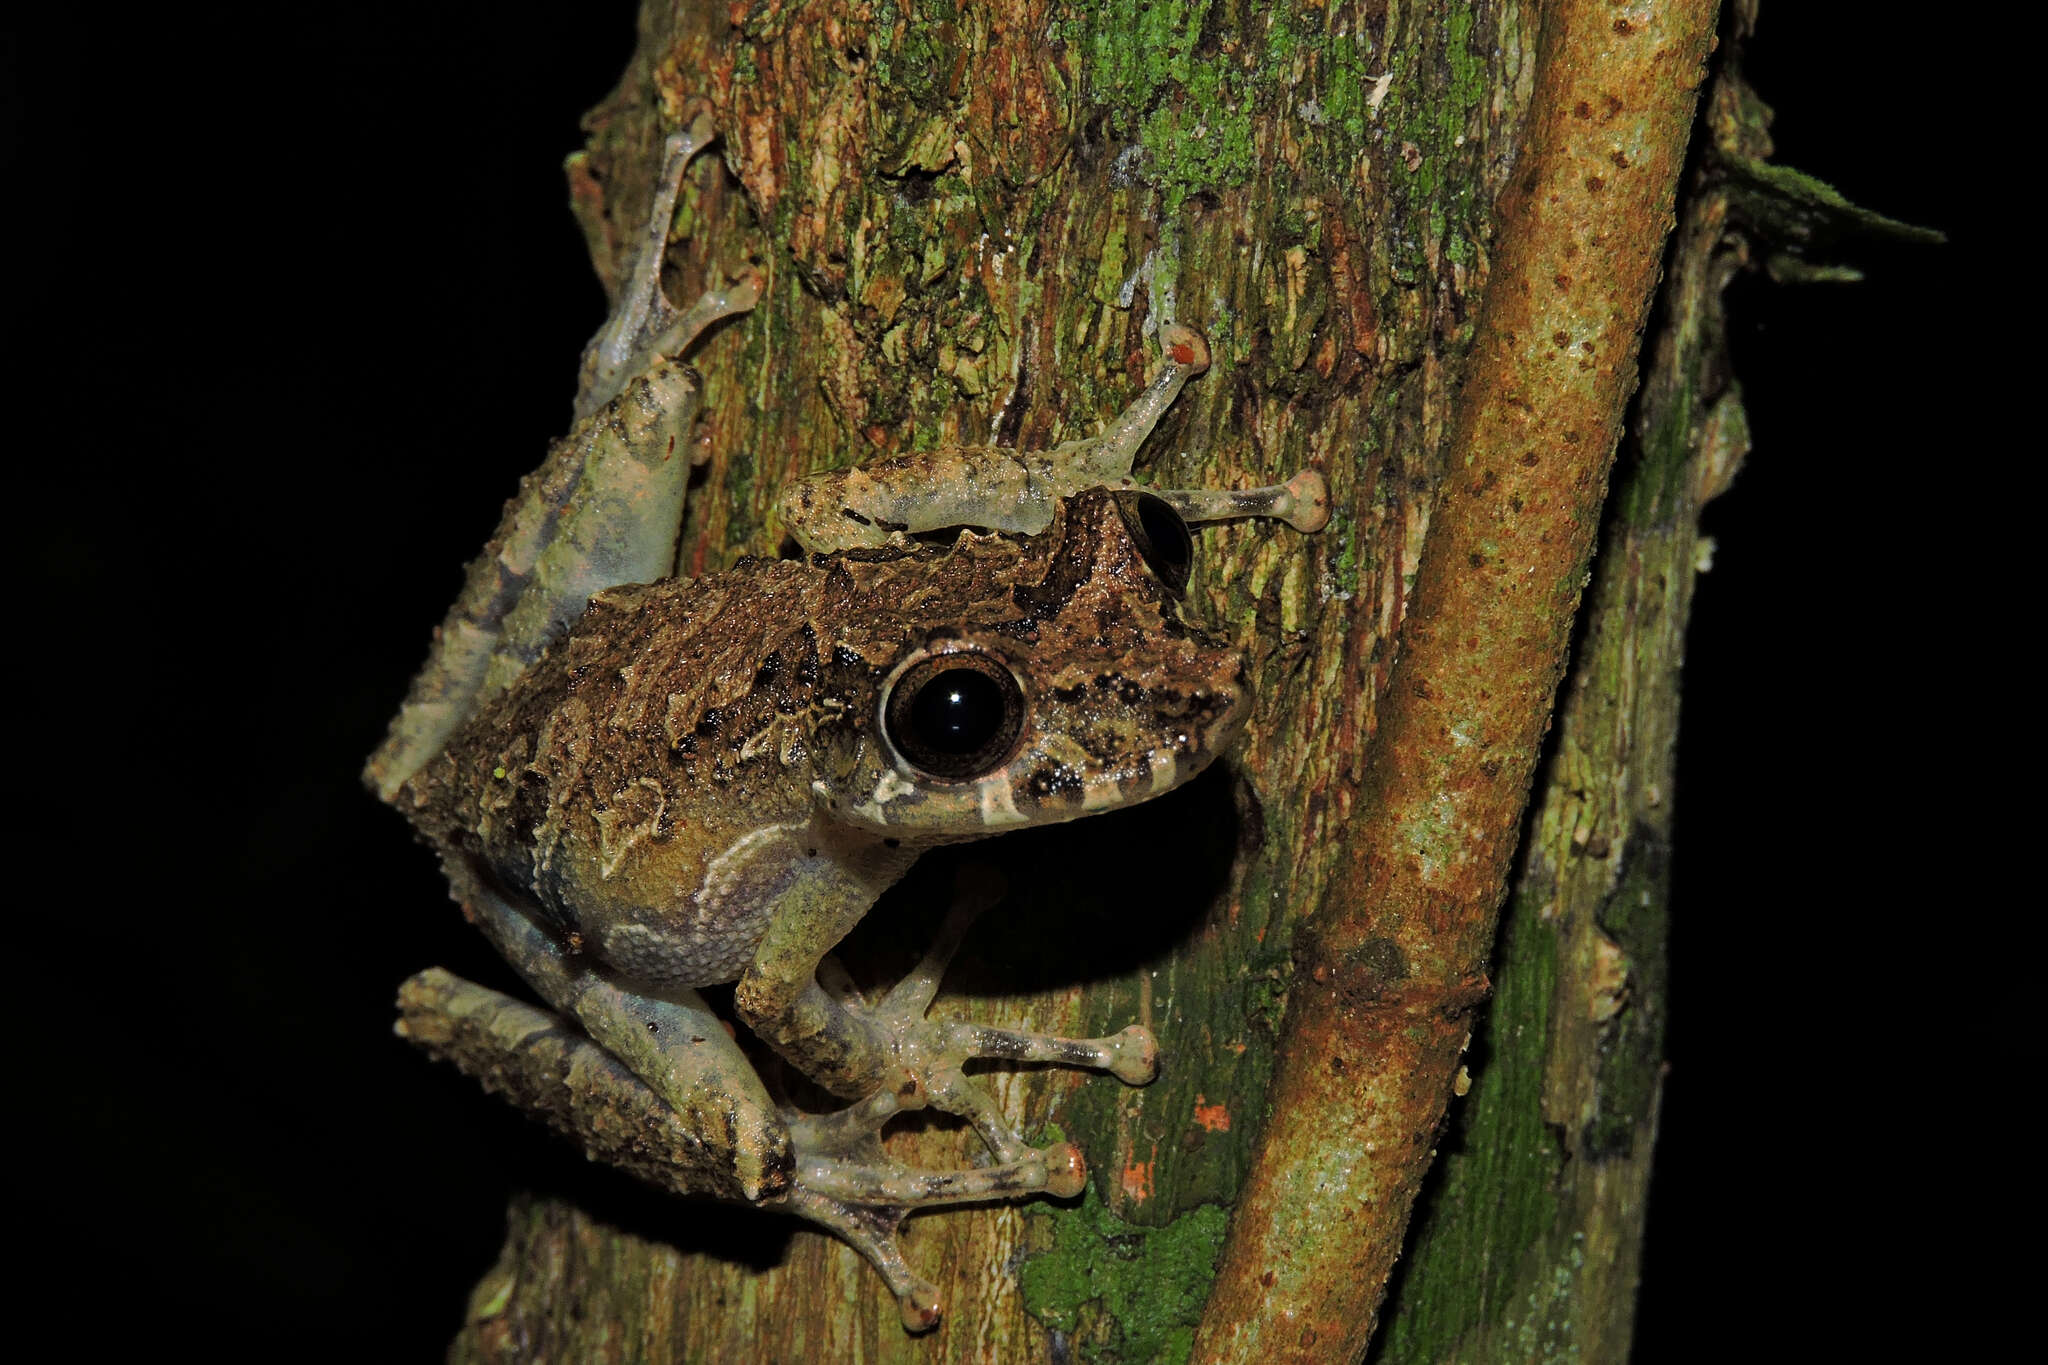 Image of Rio Verde Snouted Treefrog